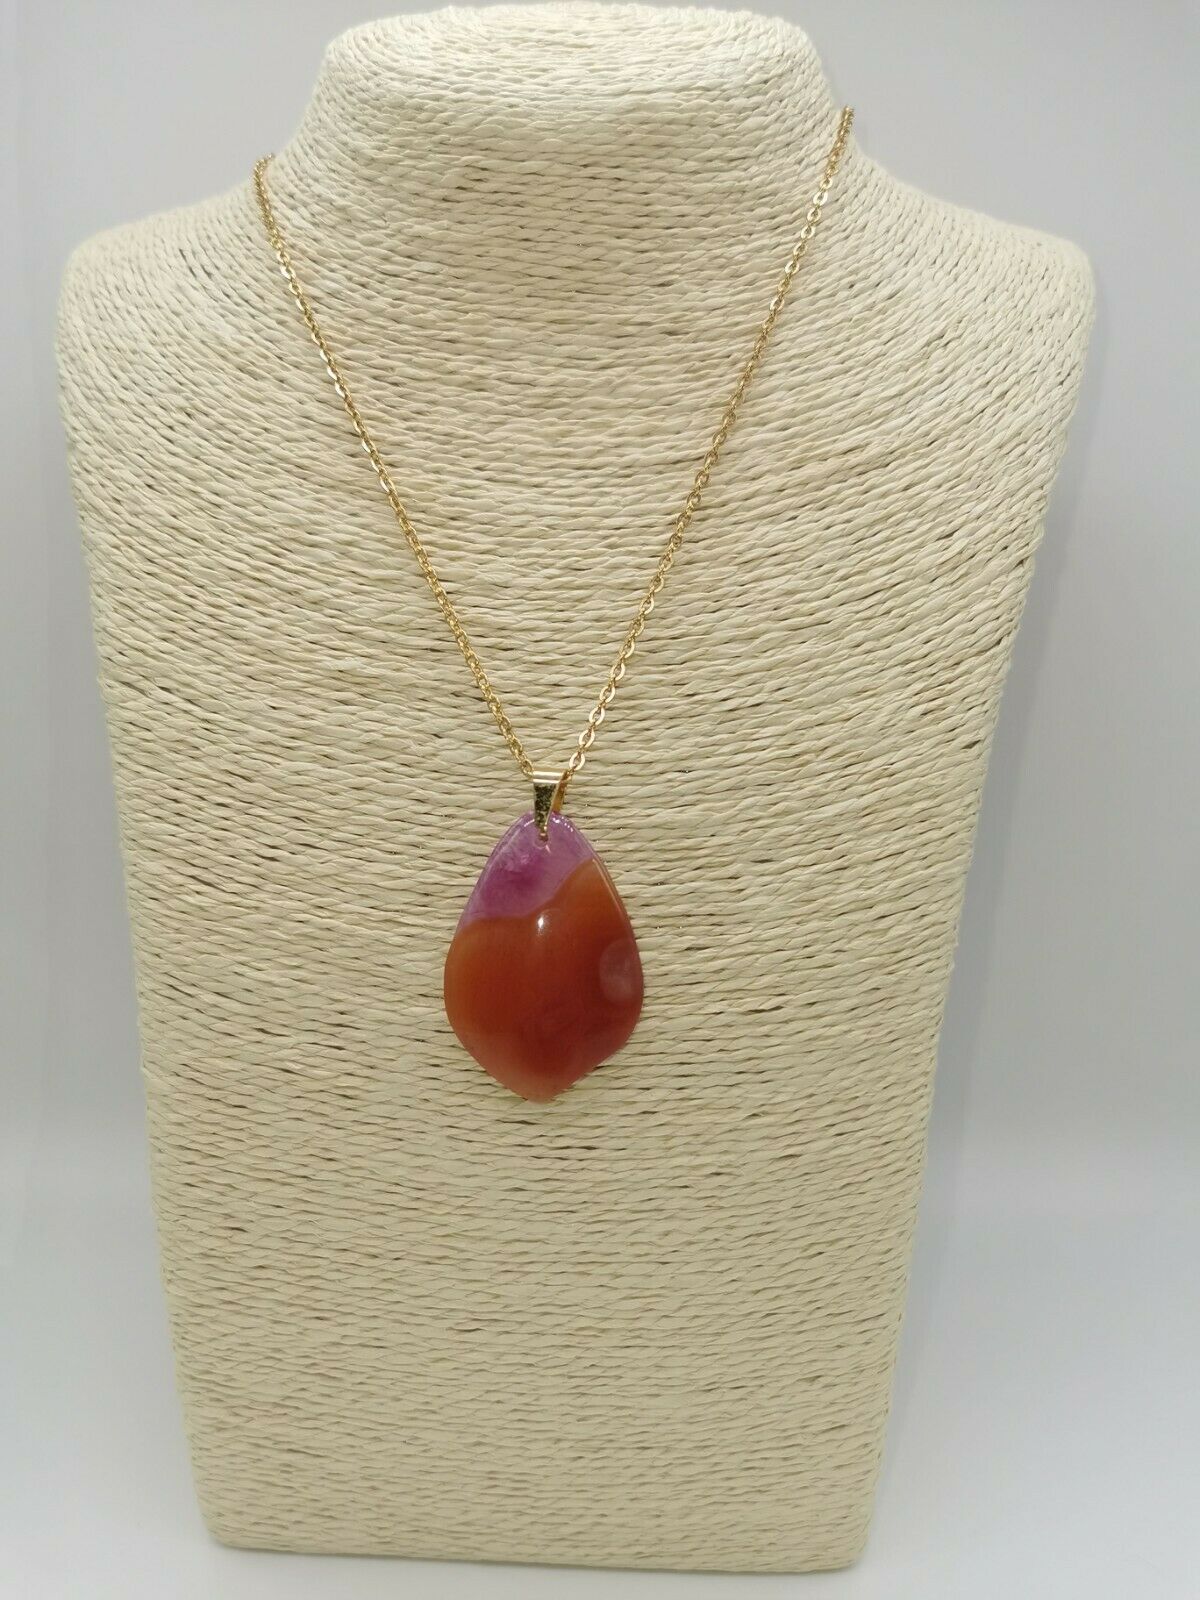 Natural Orange-Pink Agate Gemstone Pendant Stainless Steel Chain Necklace